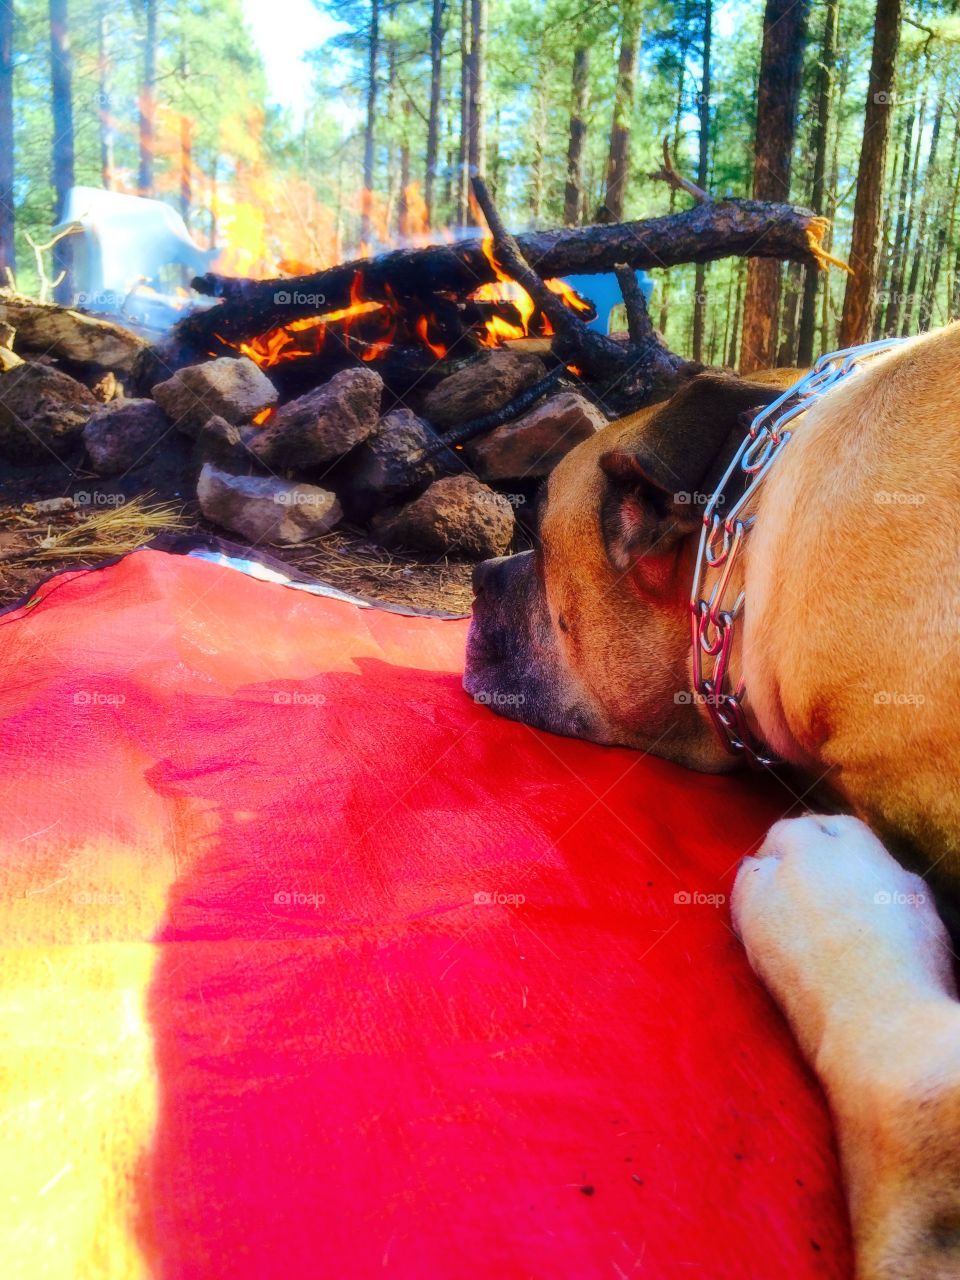 Dog warming up by campfire 